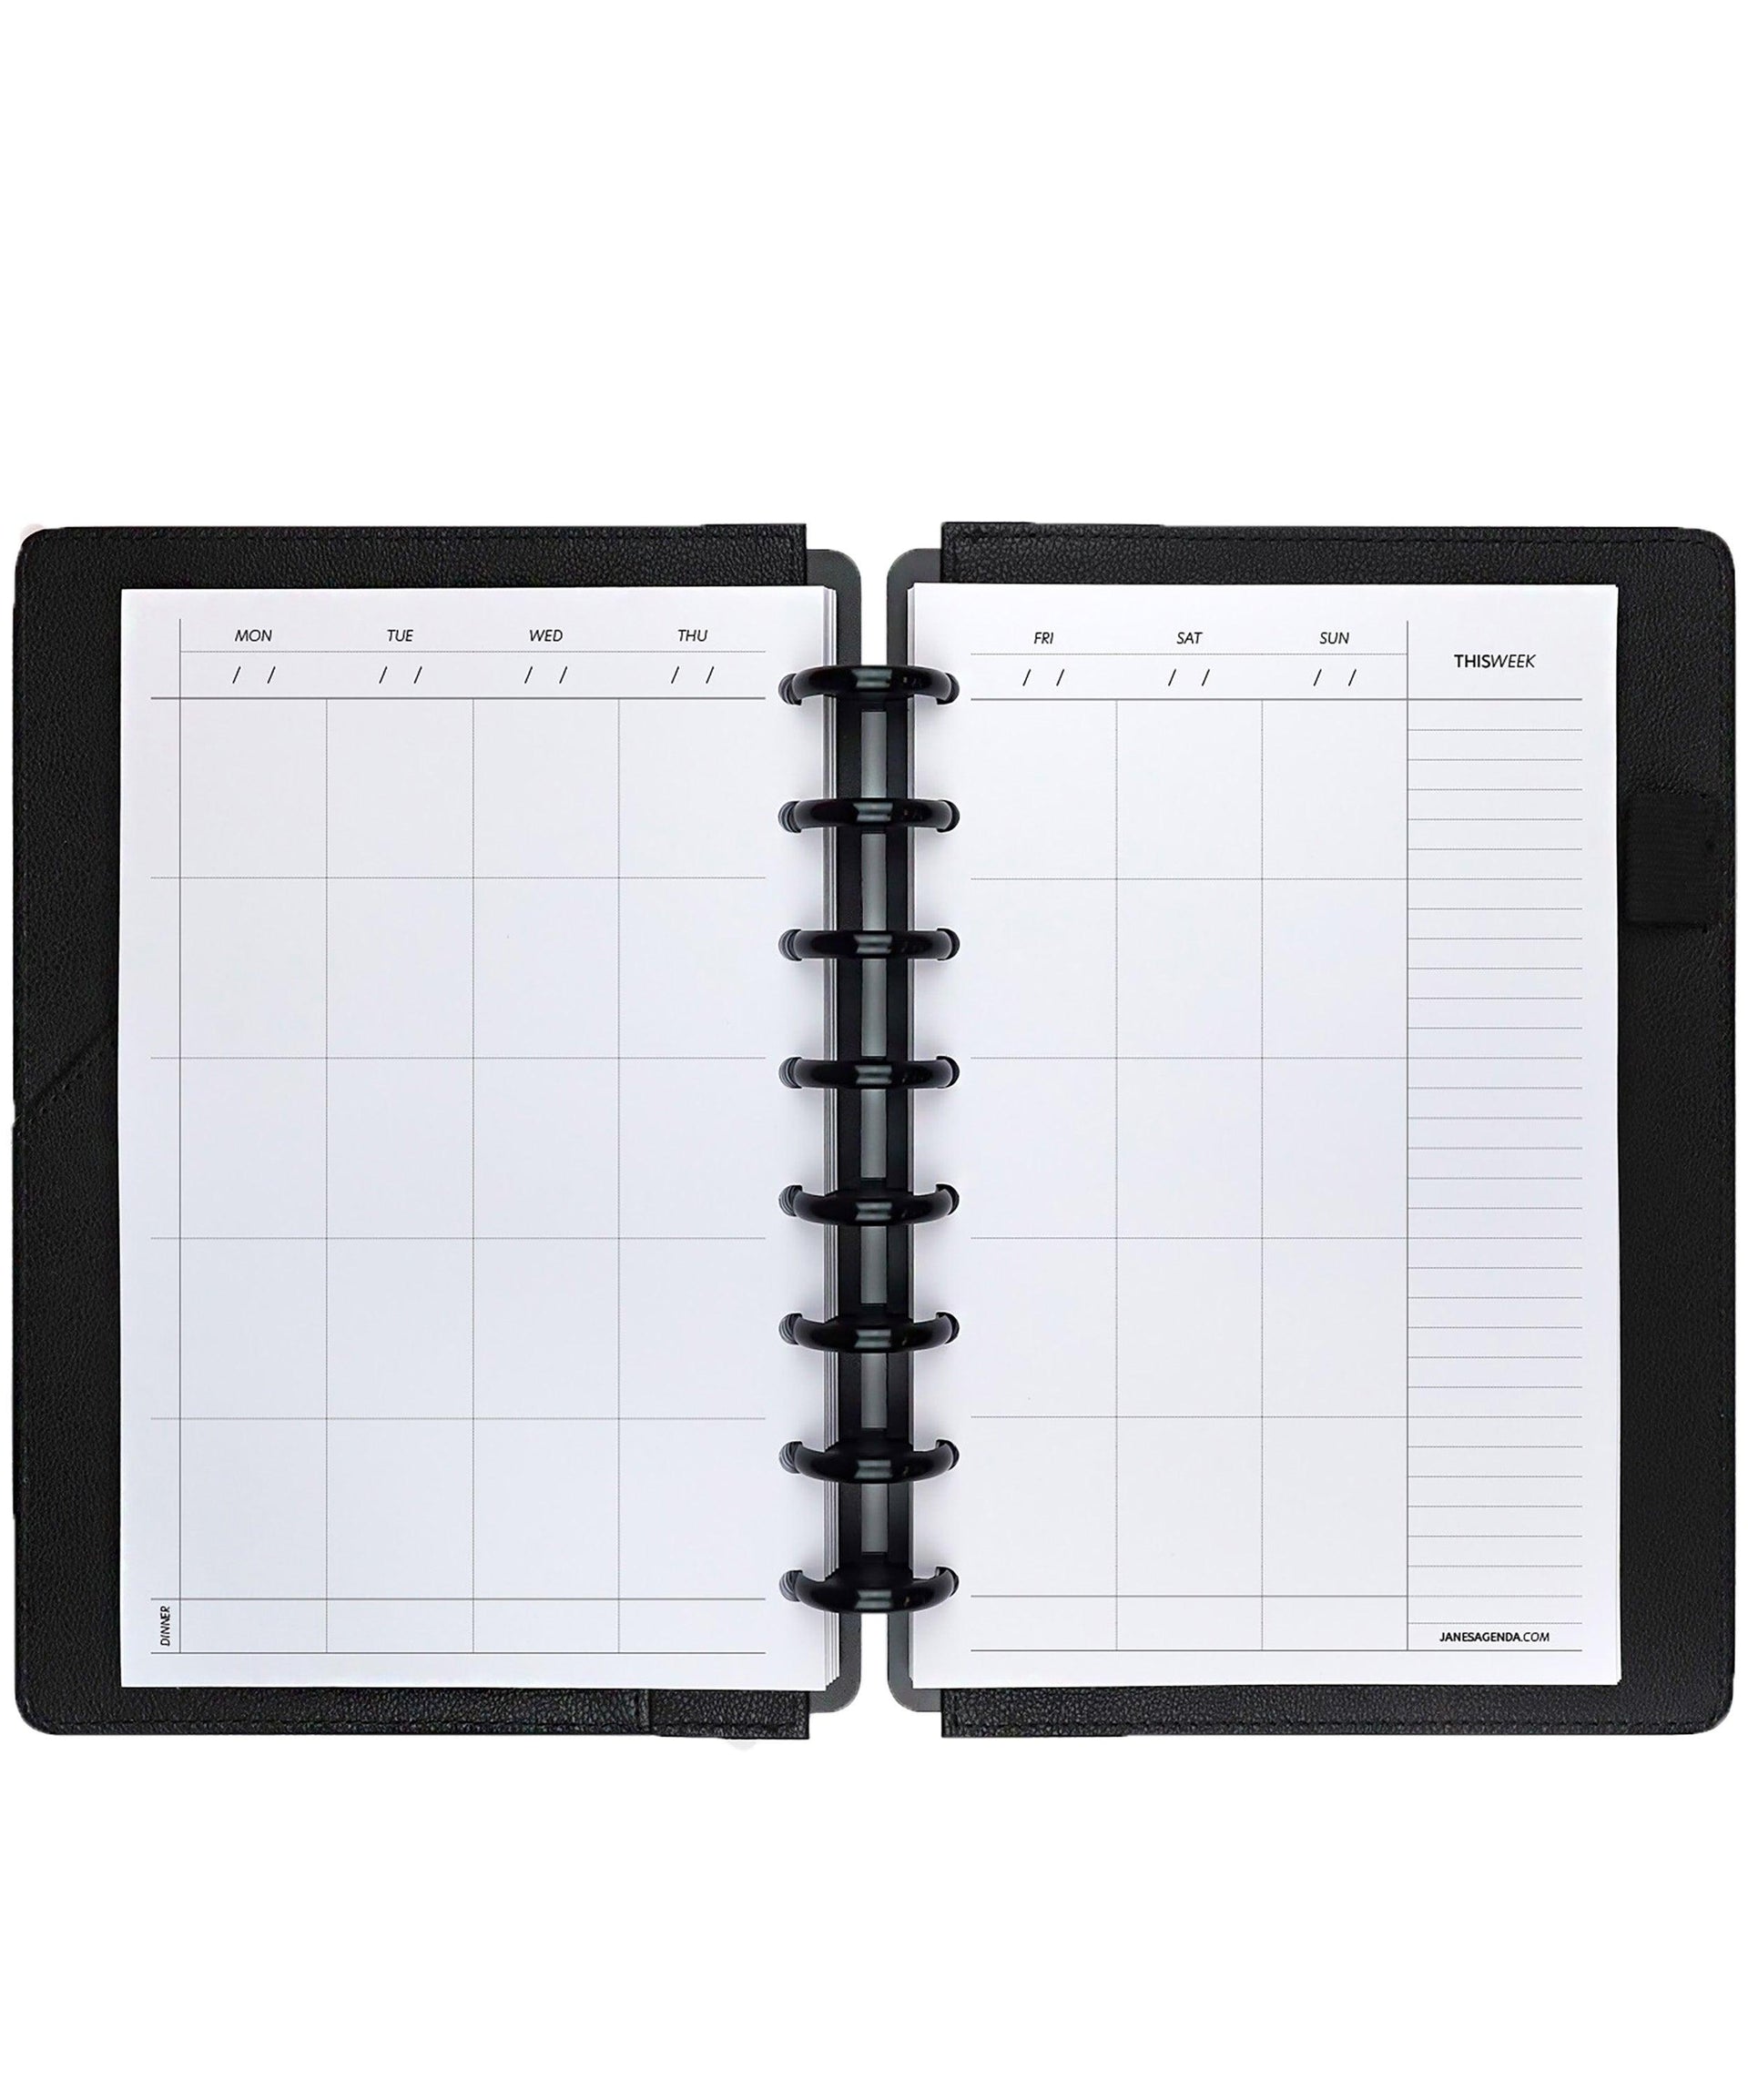 Undated weekly calendar planner inserts for discbound and six ring planners by Janes Agenda.